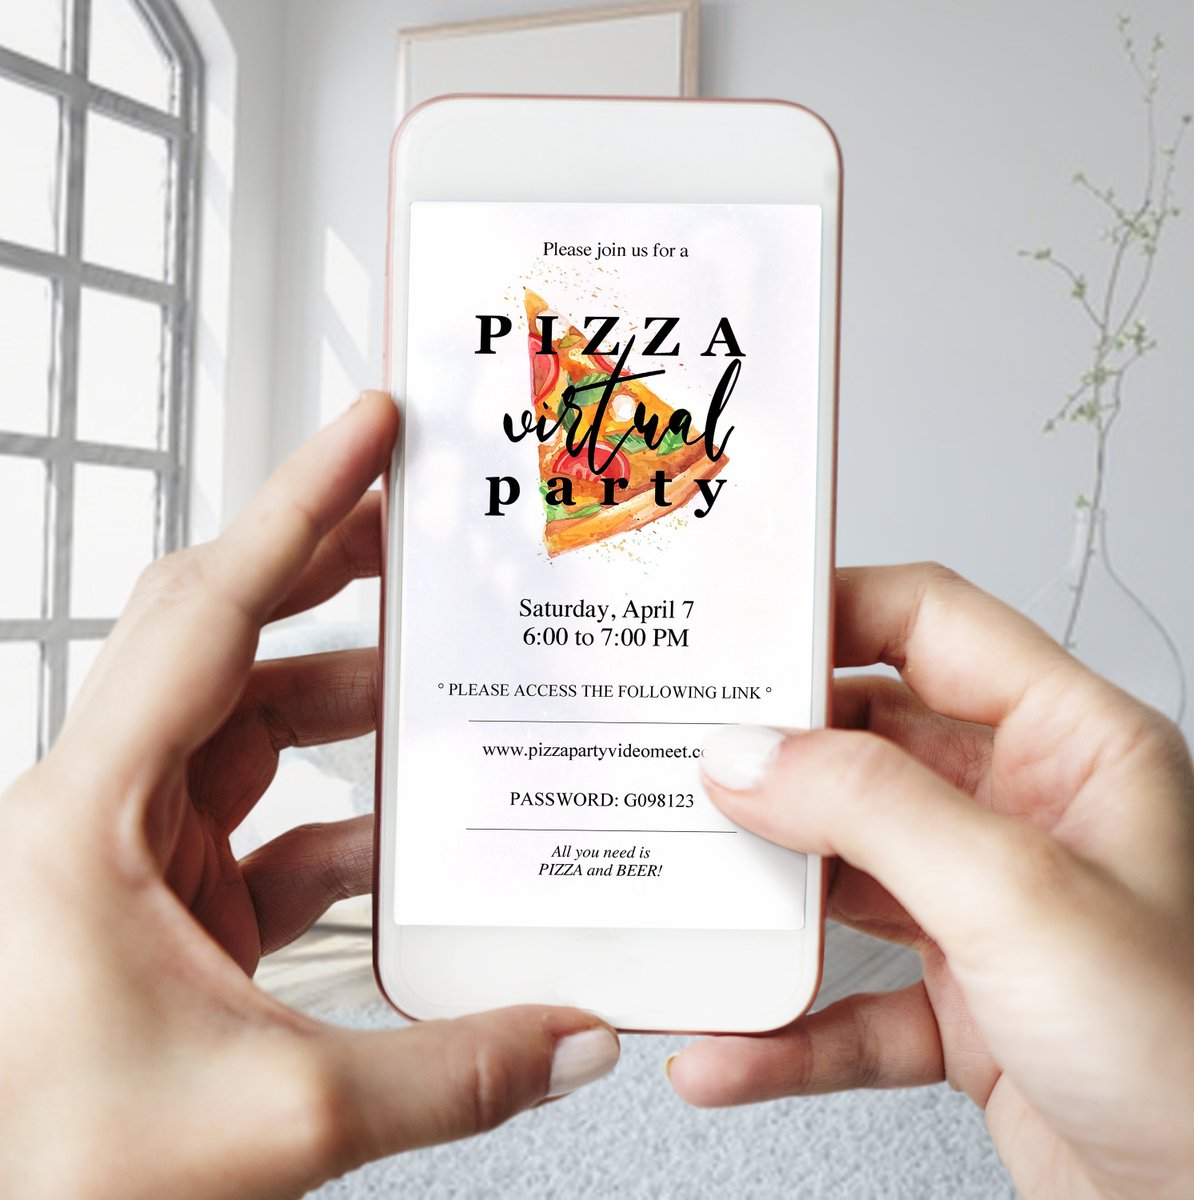 NEW!!! Stay Home and Go Virtual! Meet your friends online and share pizza and beer in a VIRTUAL PARTY.
#virtualparty #digitalparty #invitationtemplate #digitalinvitation #quaranteneparty #videomeet #stayhome #pizzaparty #esty #etsyshop